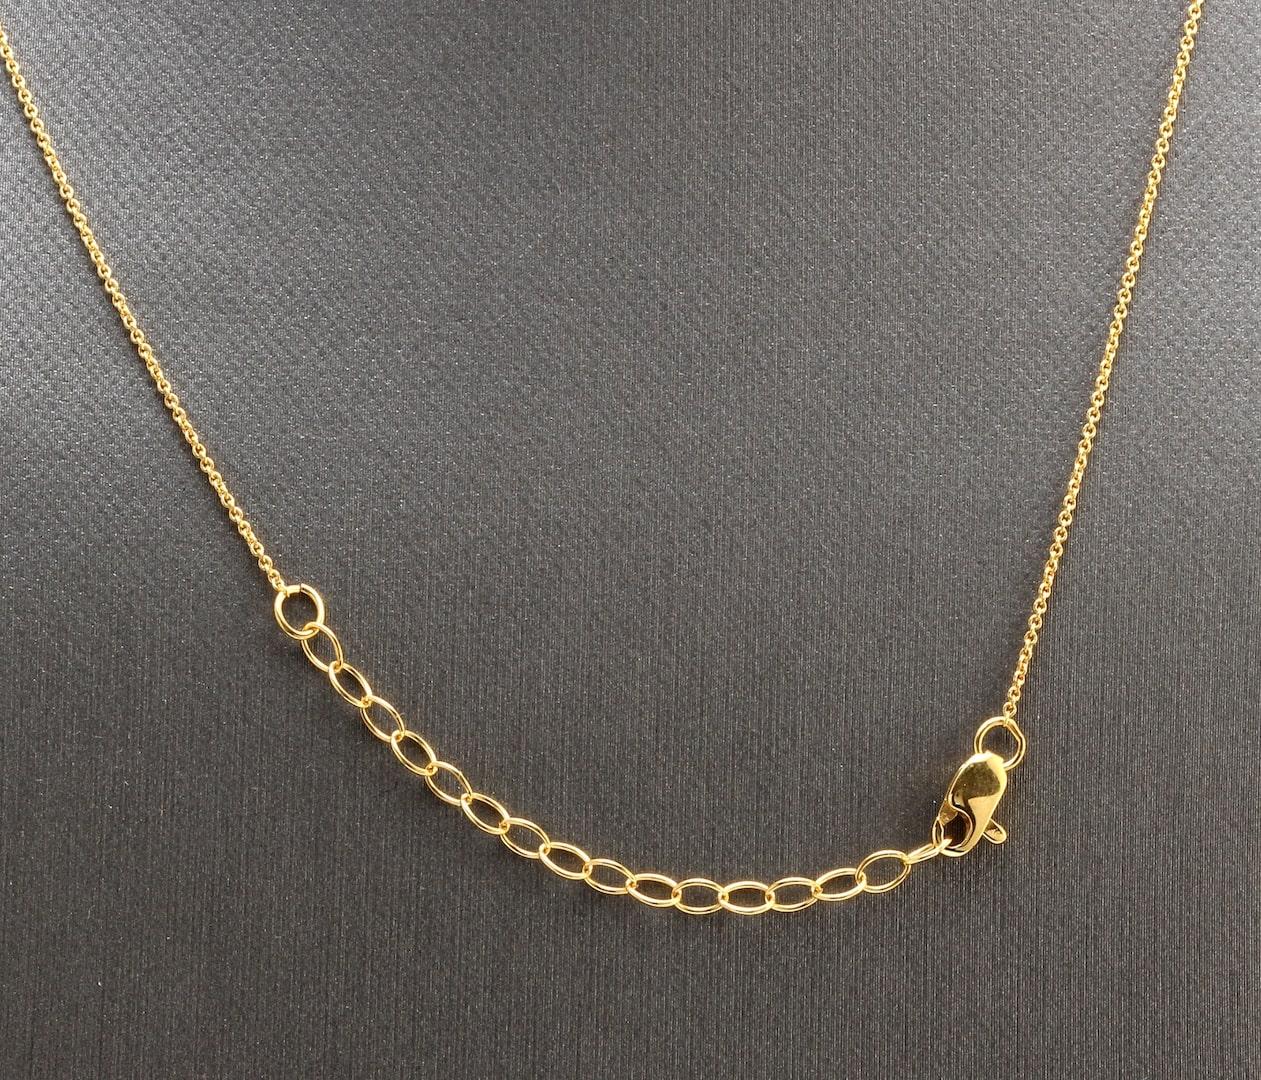 Mixed Cut Splendid 14k Solid Yellow Gold Infinity Necklace with Natural Diamond Accent For Sale